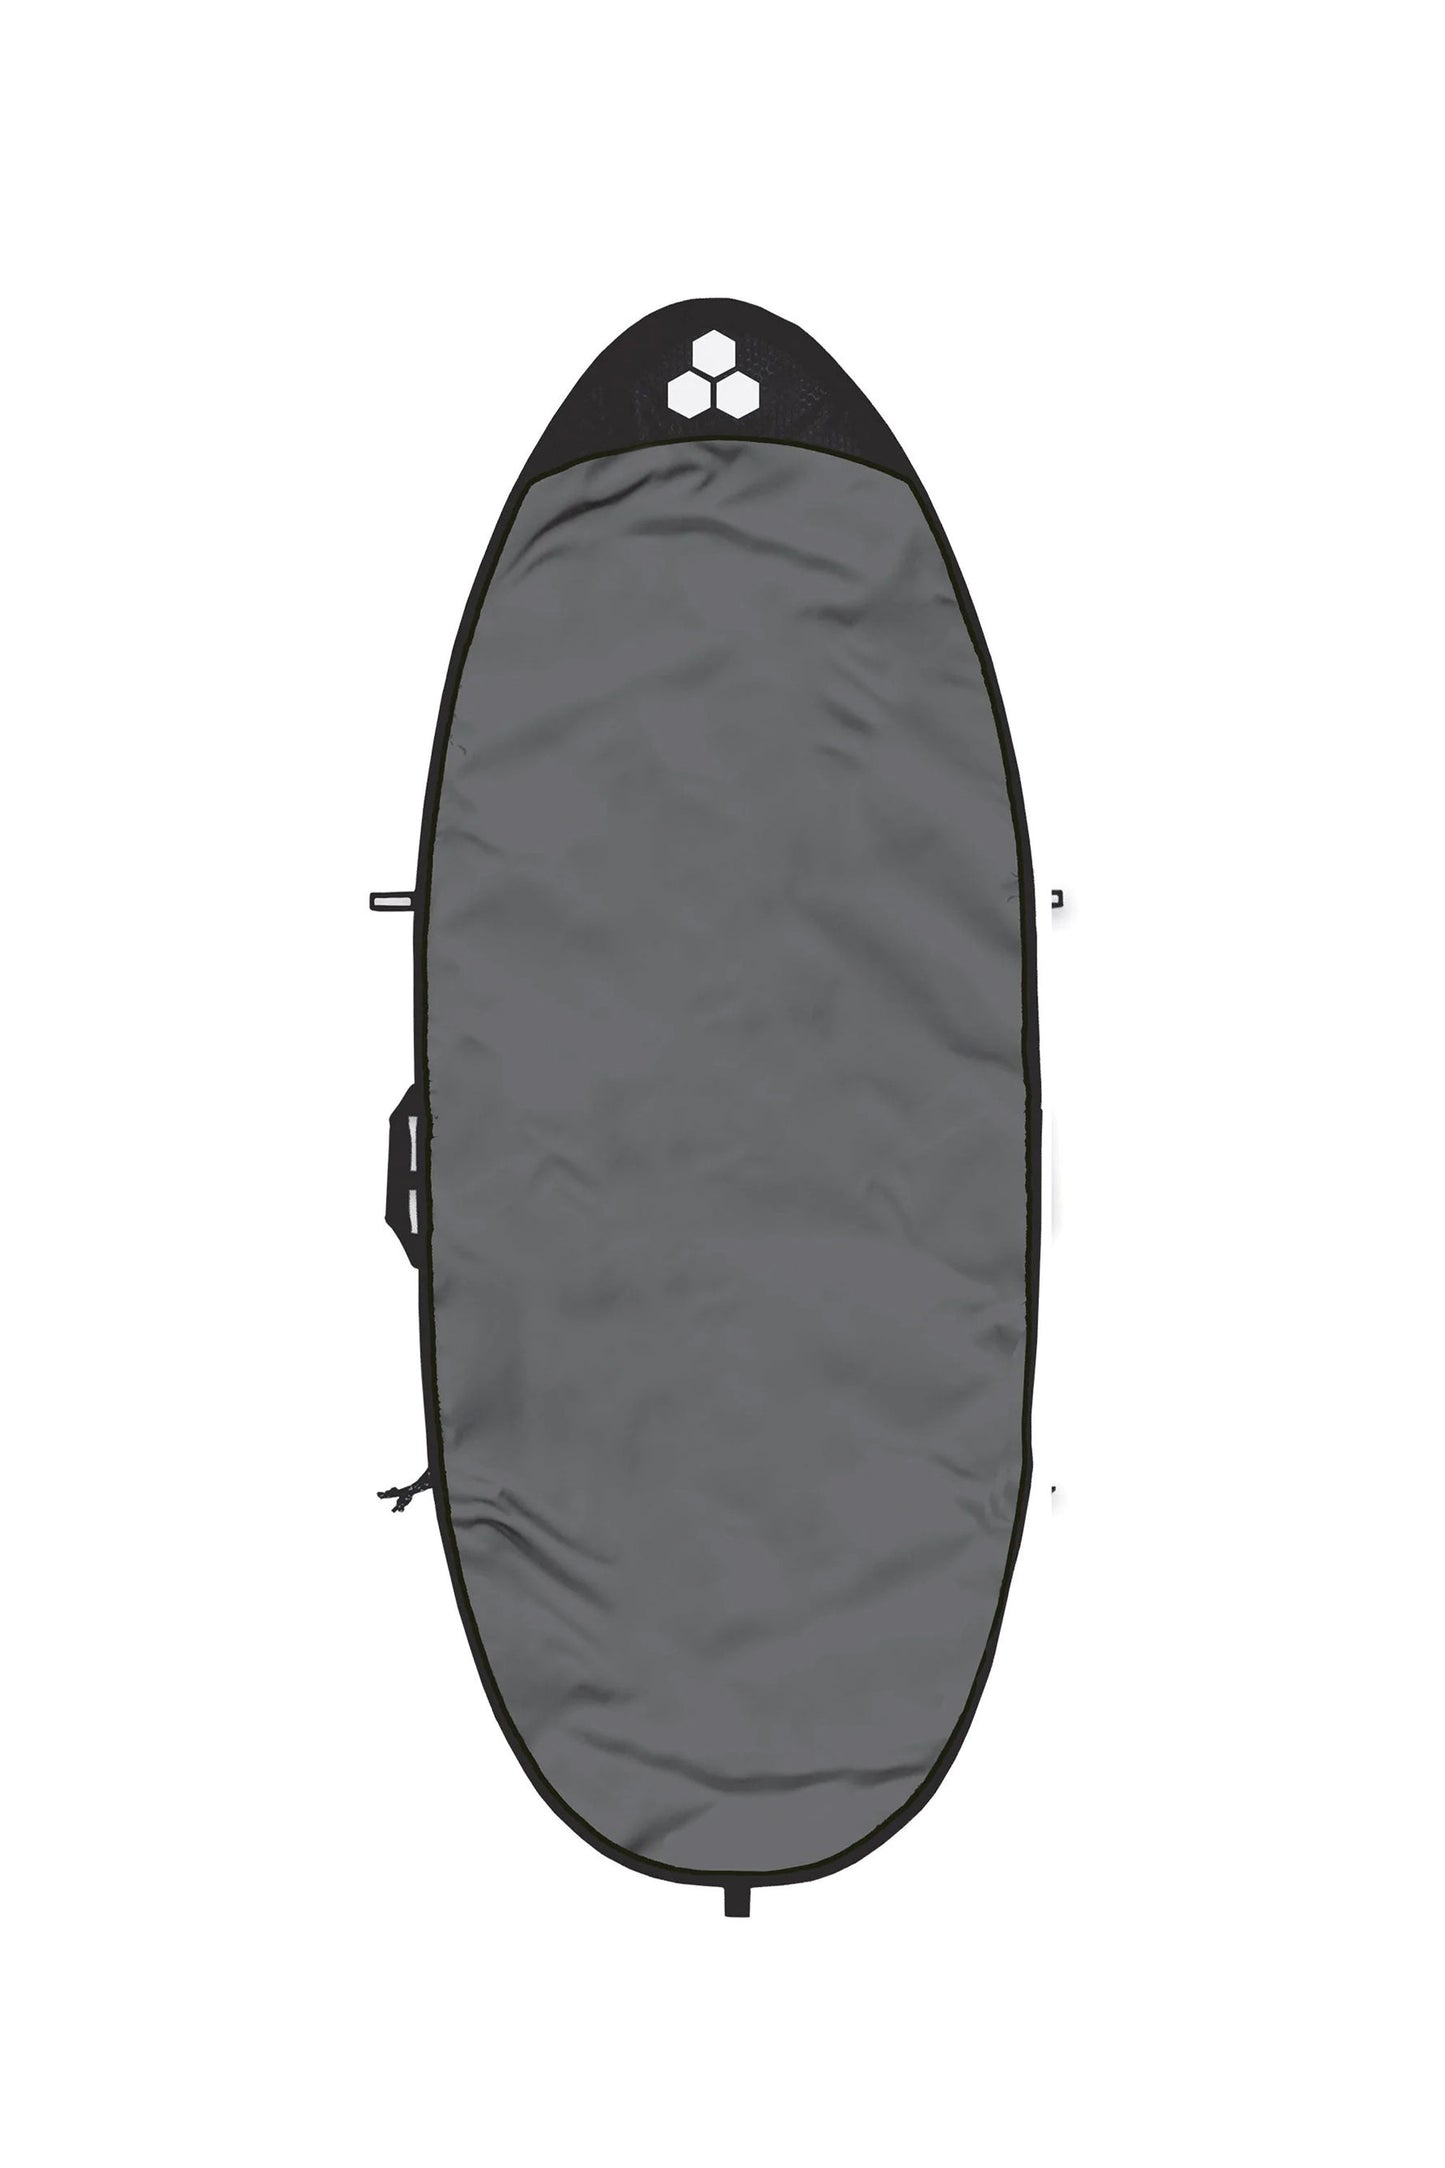     Pukas-Surf-Shop-channel-islands-surfboard-Feather-Lite-Specialty-Bag-7.2